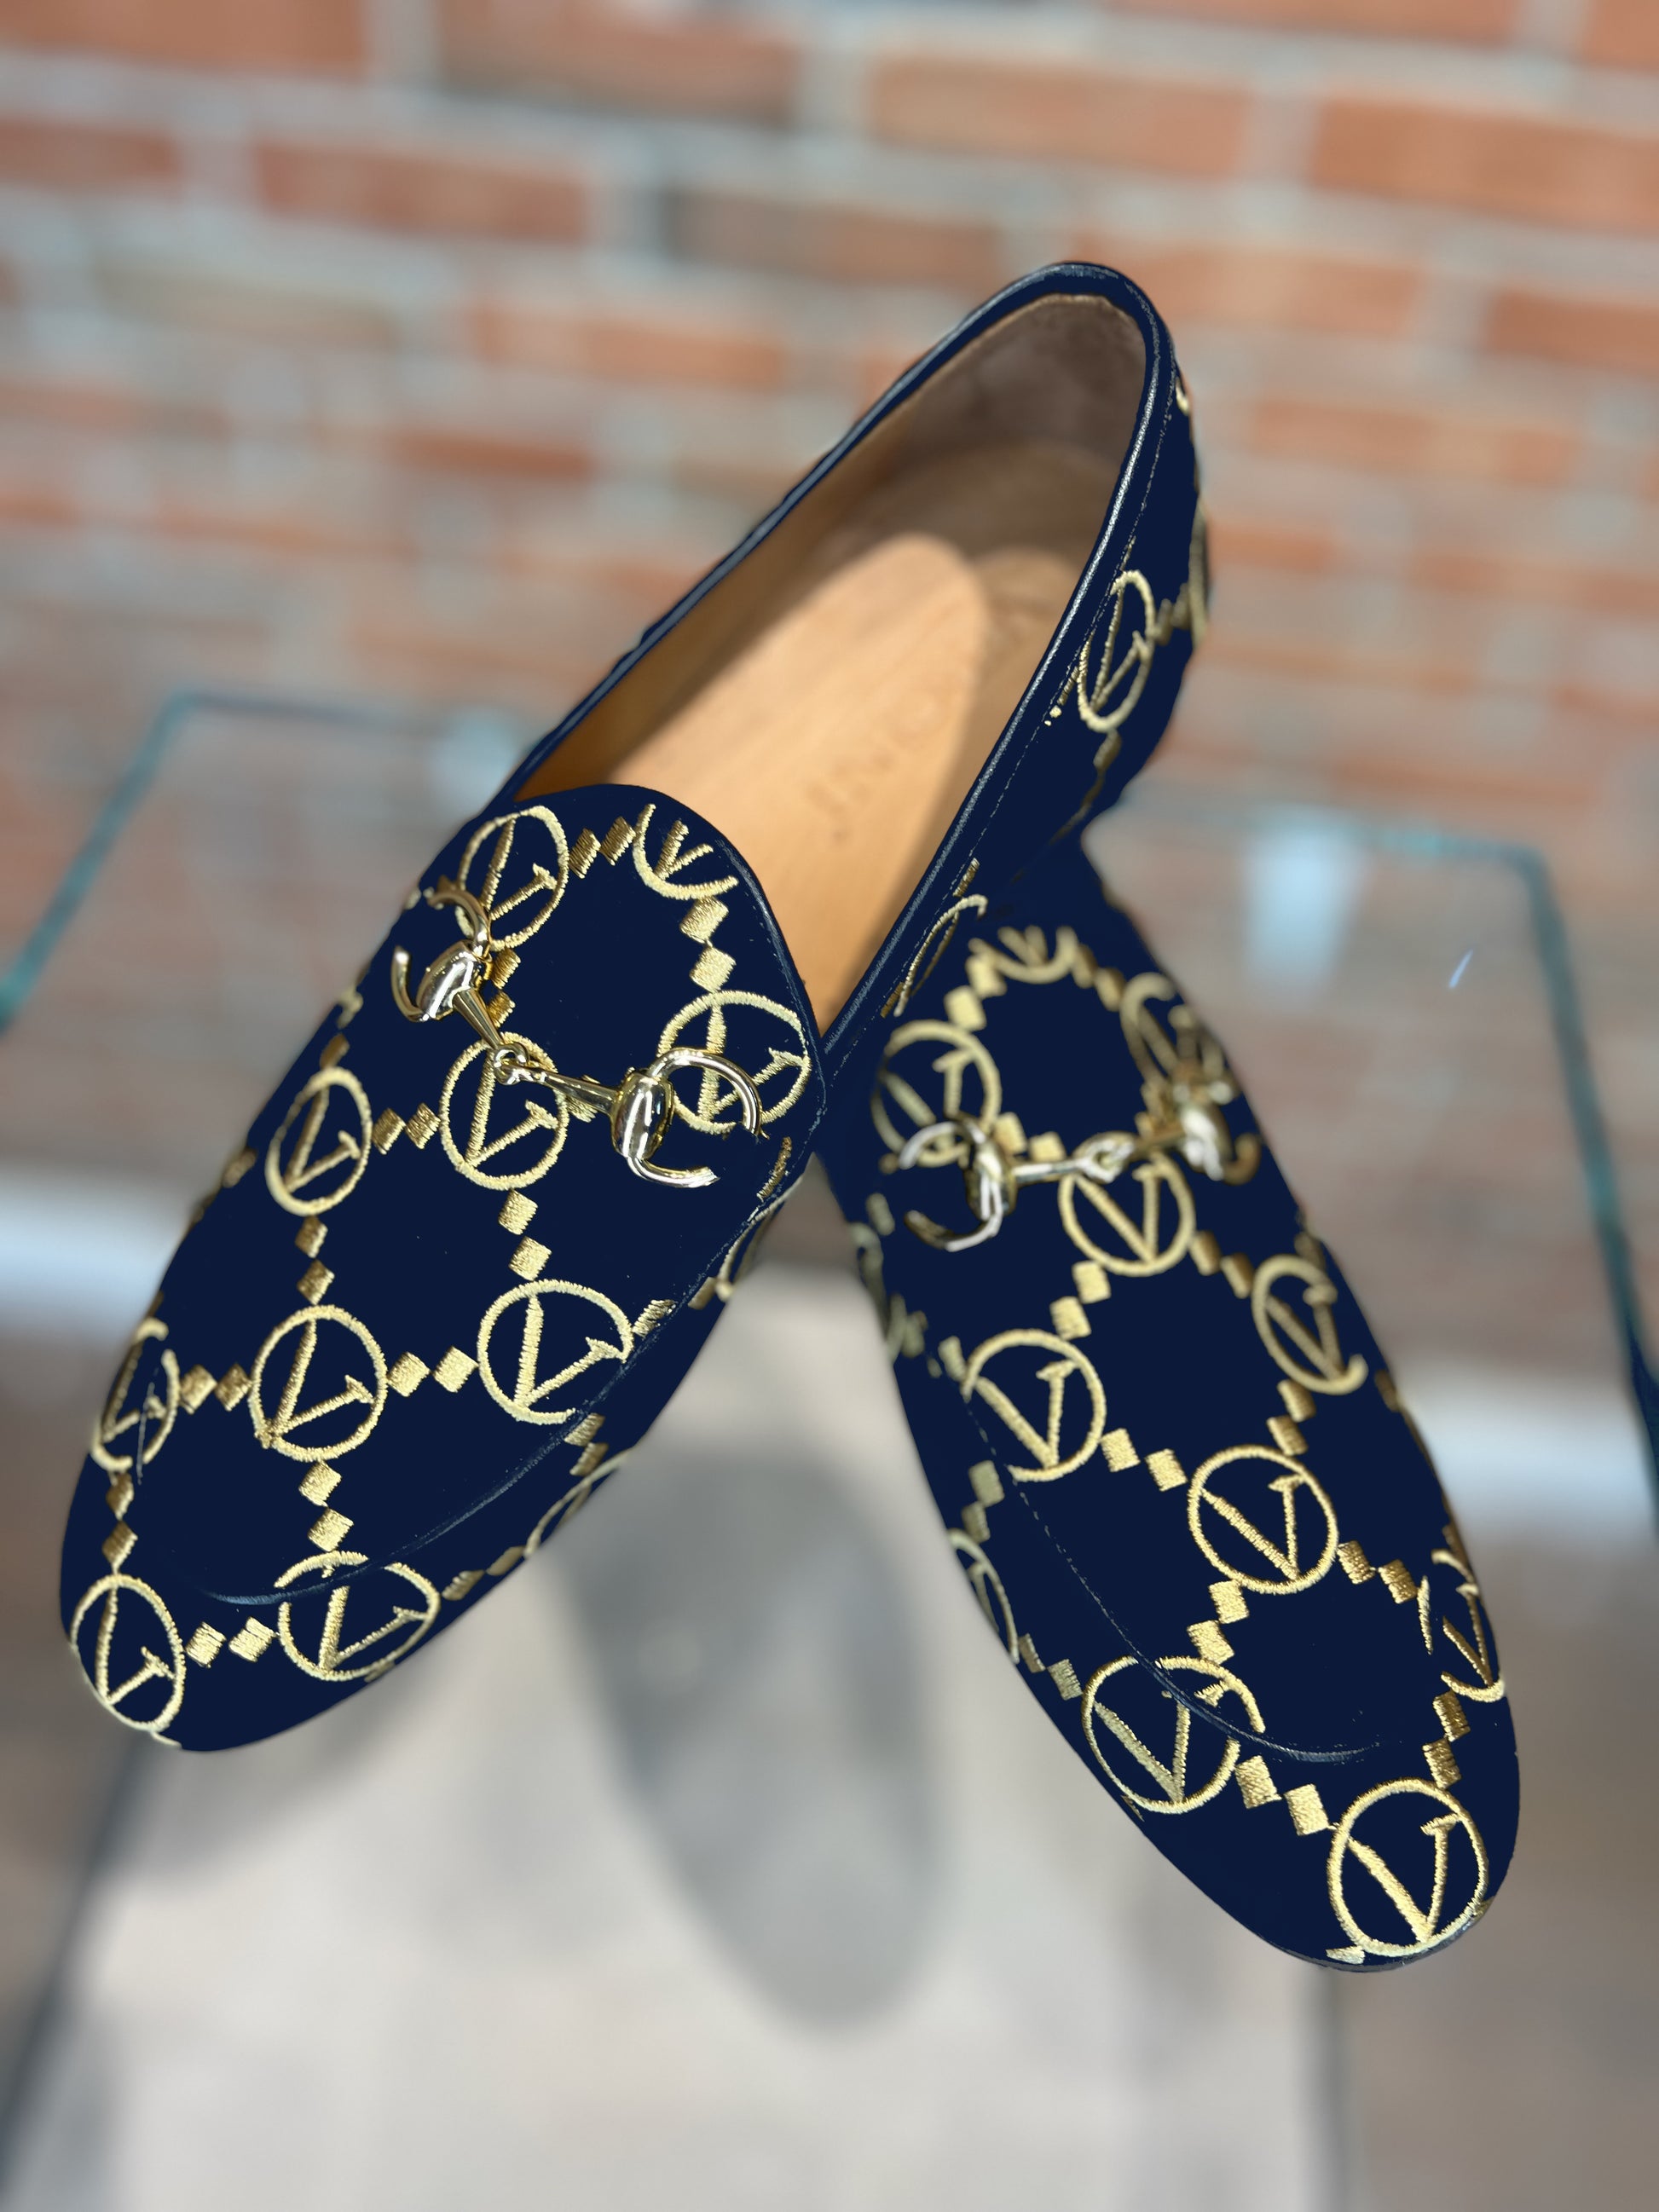 V SIGN NAVY BLUE SHOES Ph inventory shoes Vercini